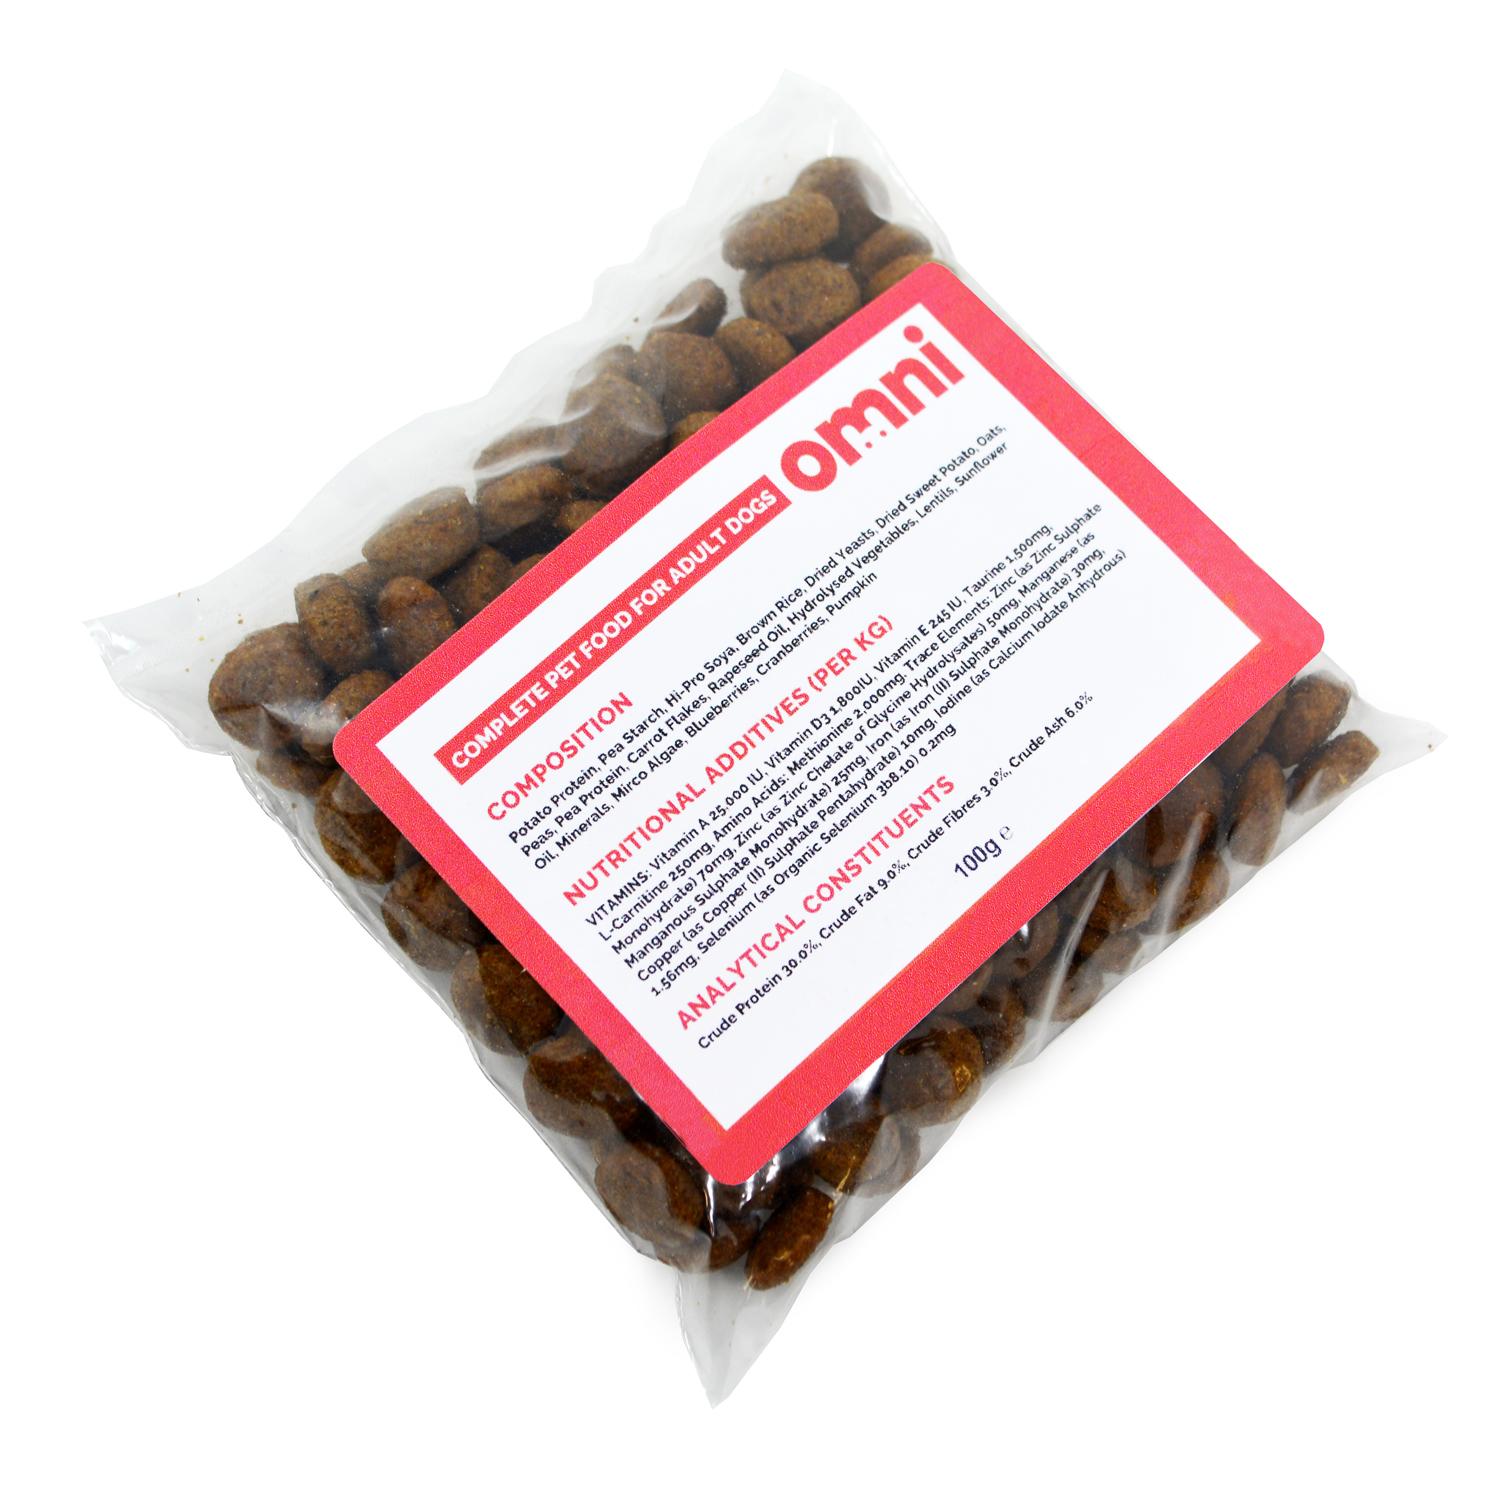 And angled view of a sample pack of Omni vegan dog food